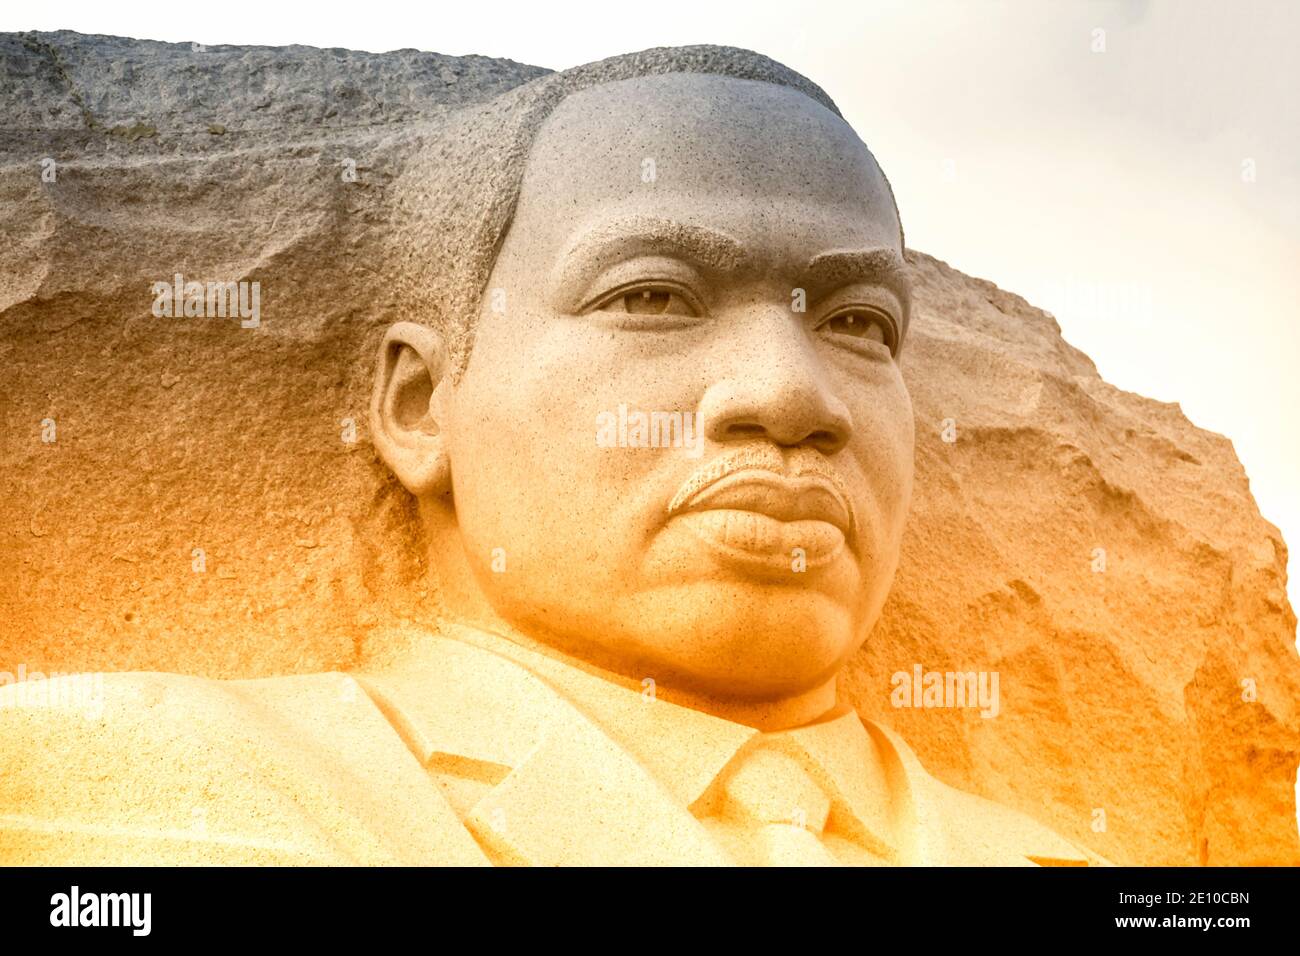 Martin Luther King Jr. Monument in Washington DC Stock Photo